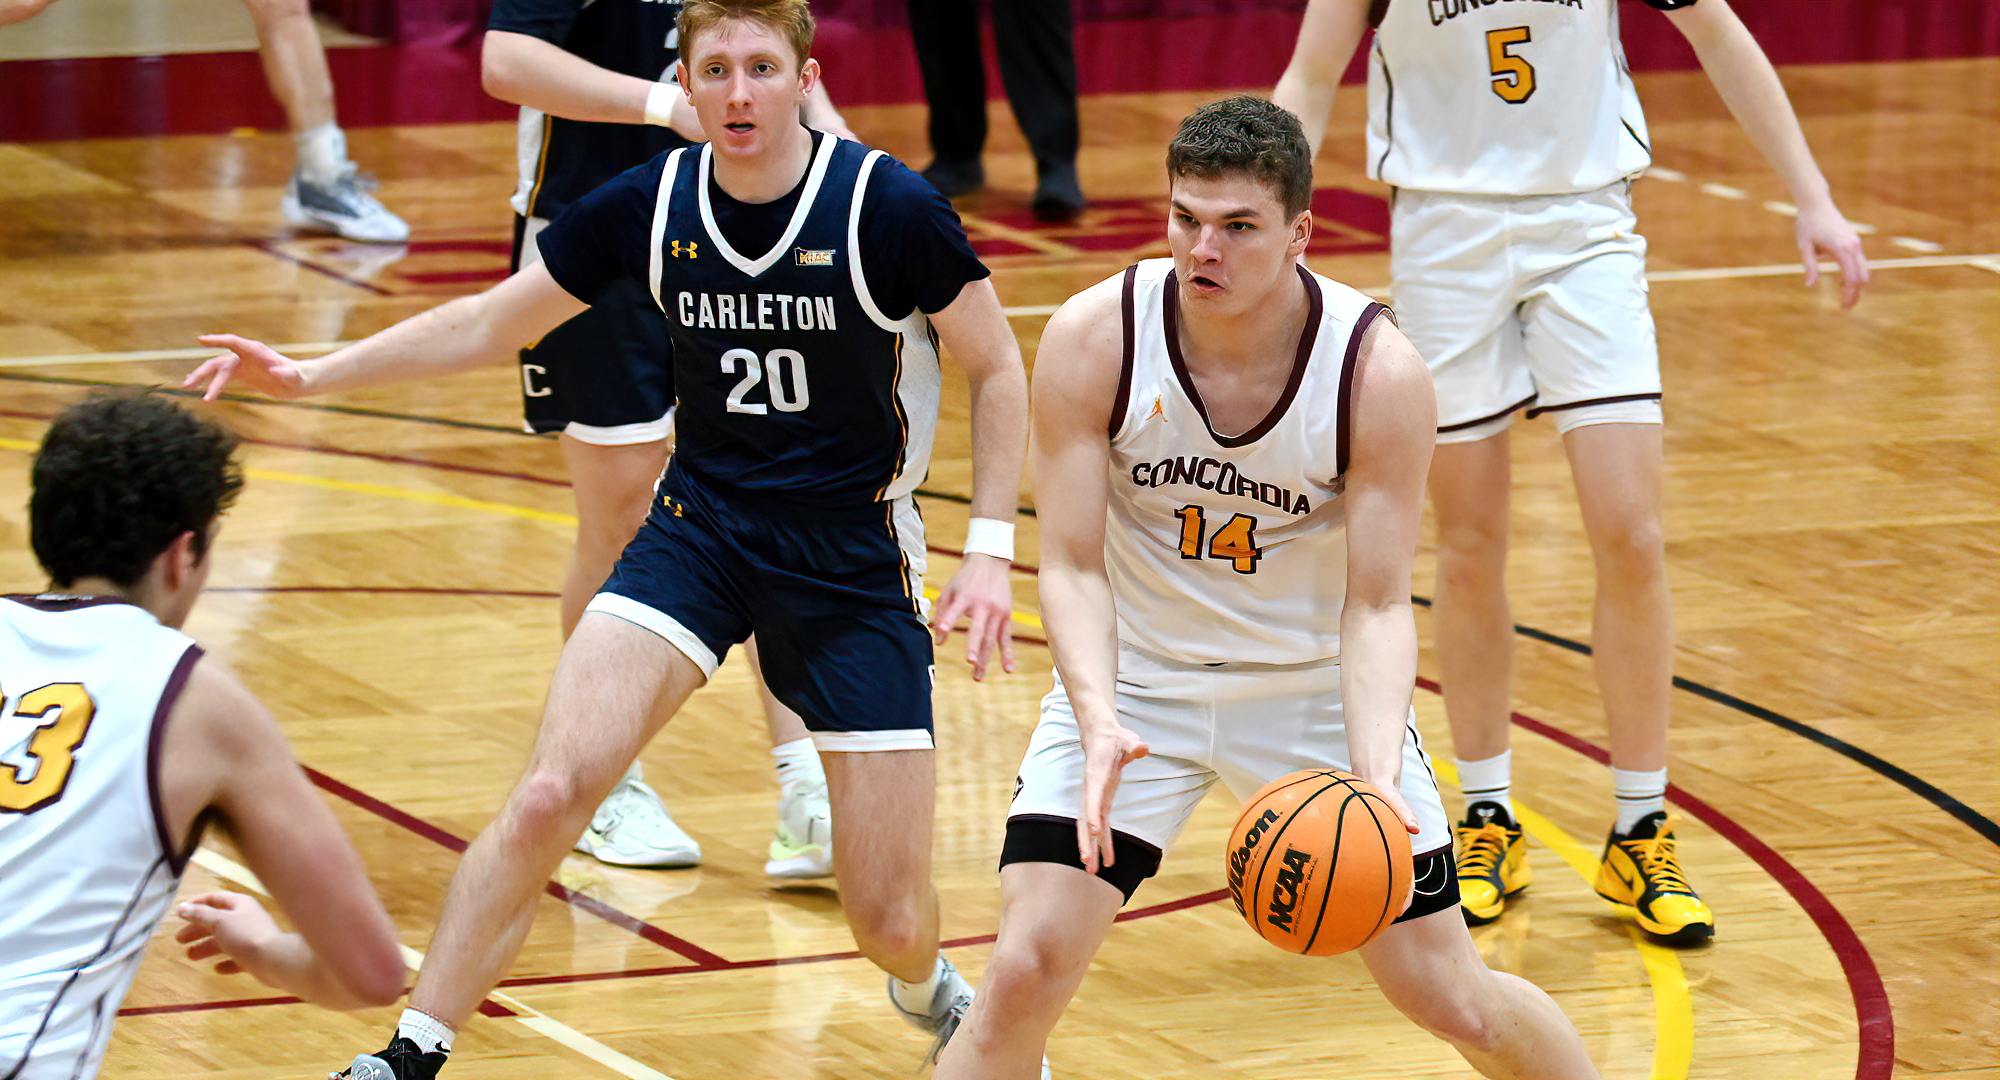 Rowan Nelson gets ready to hand the ball to Jacob Cook during CC's win over Carleton. Nelson and Cook combined for 28 points and 15 rebounds.